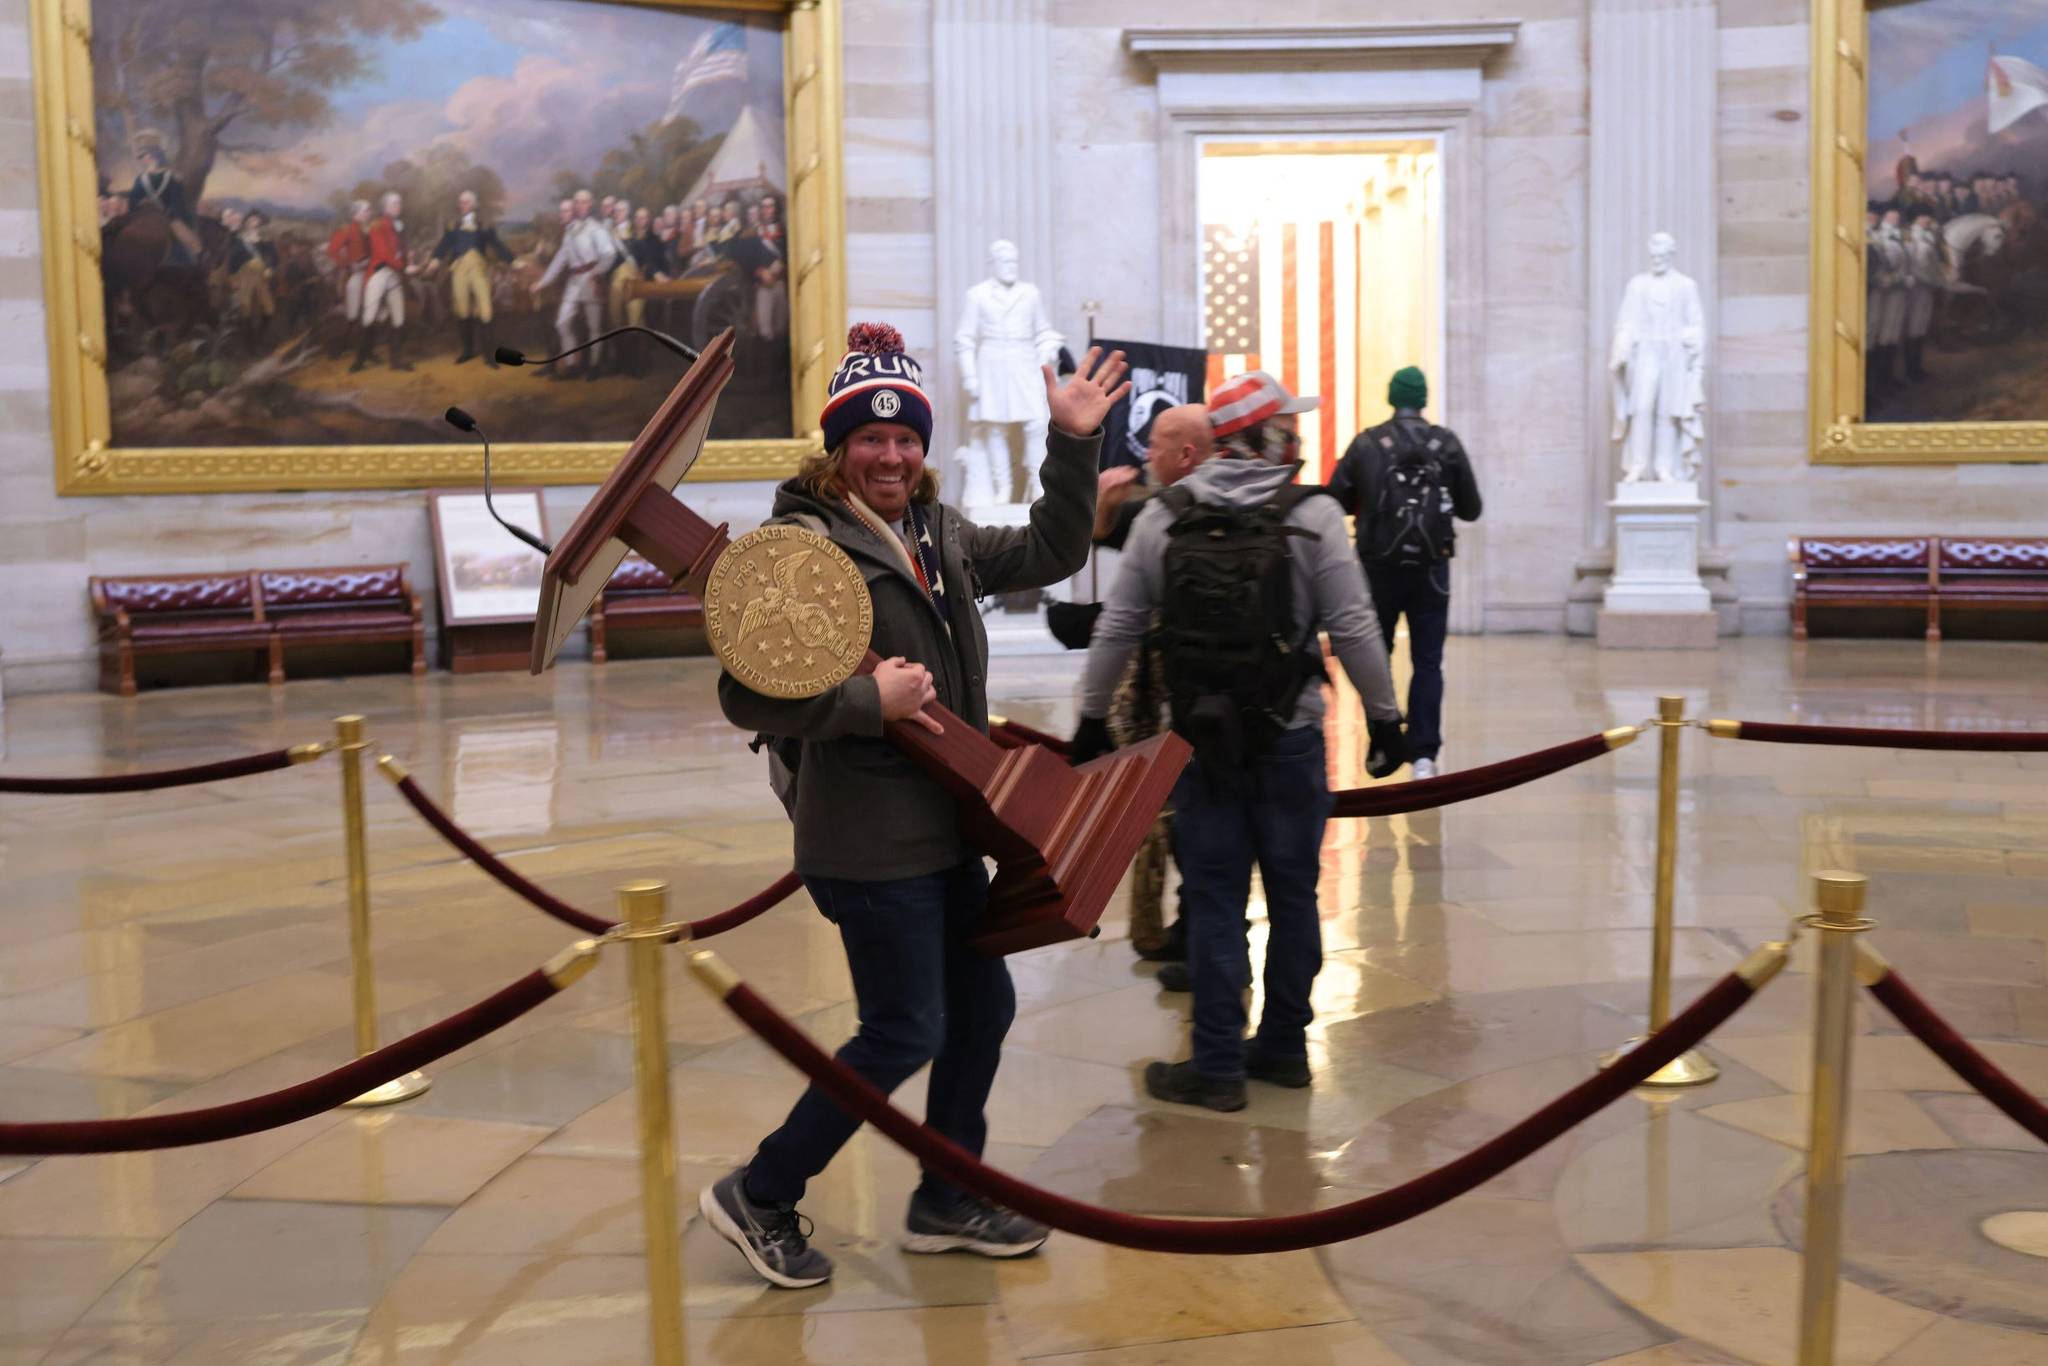 Win McNamee/Getty Images 
Adam Johnson, 36, of Parrish, Fla., faces felony charges after he was seen carrying House Speaker House Nancy Pelosi’s lectern through the U.S. Capitol on Jan. 6.